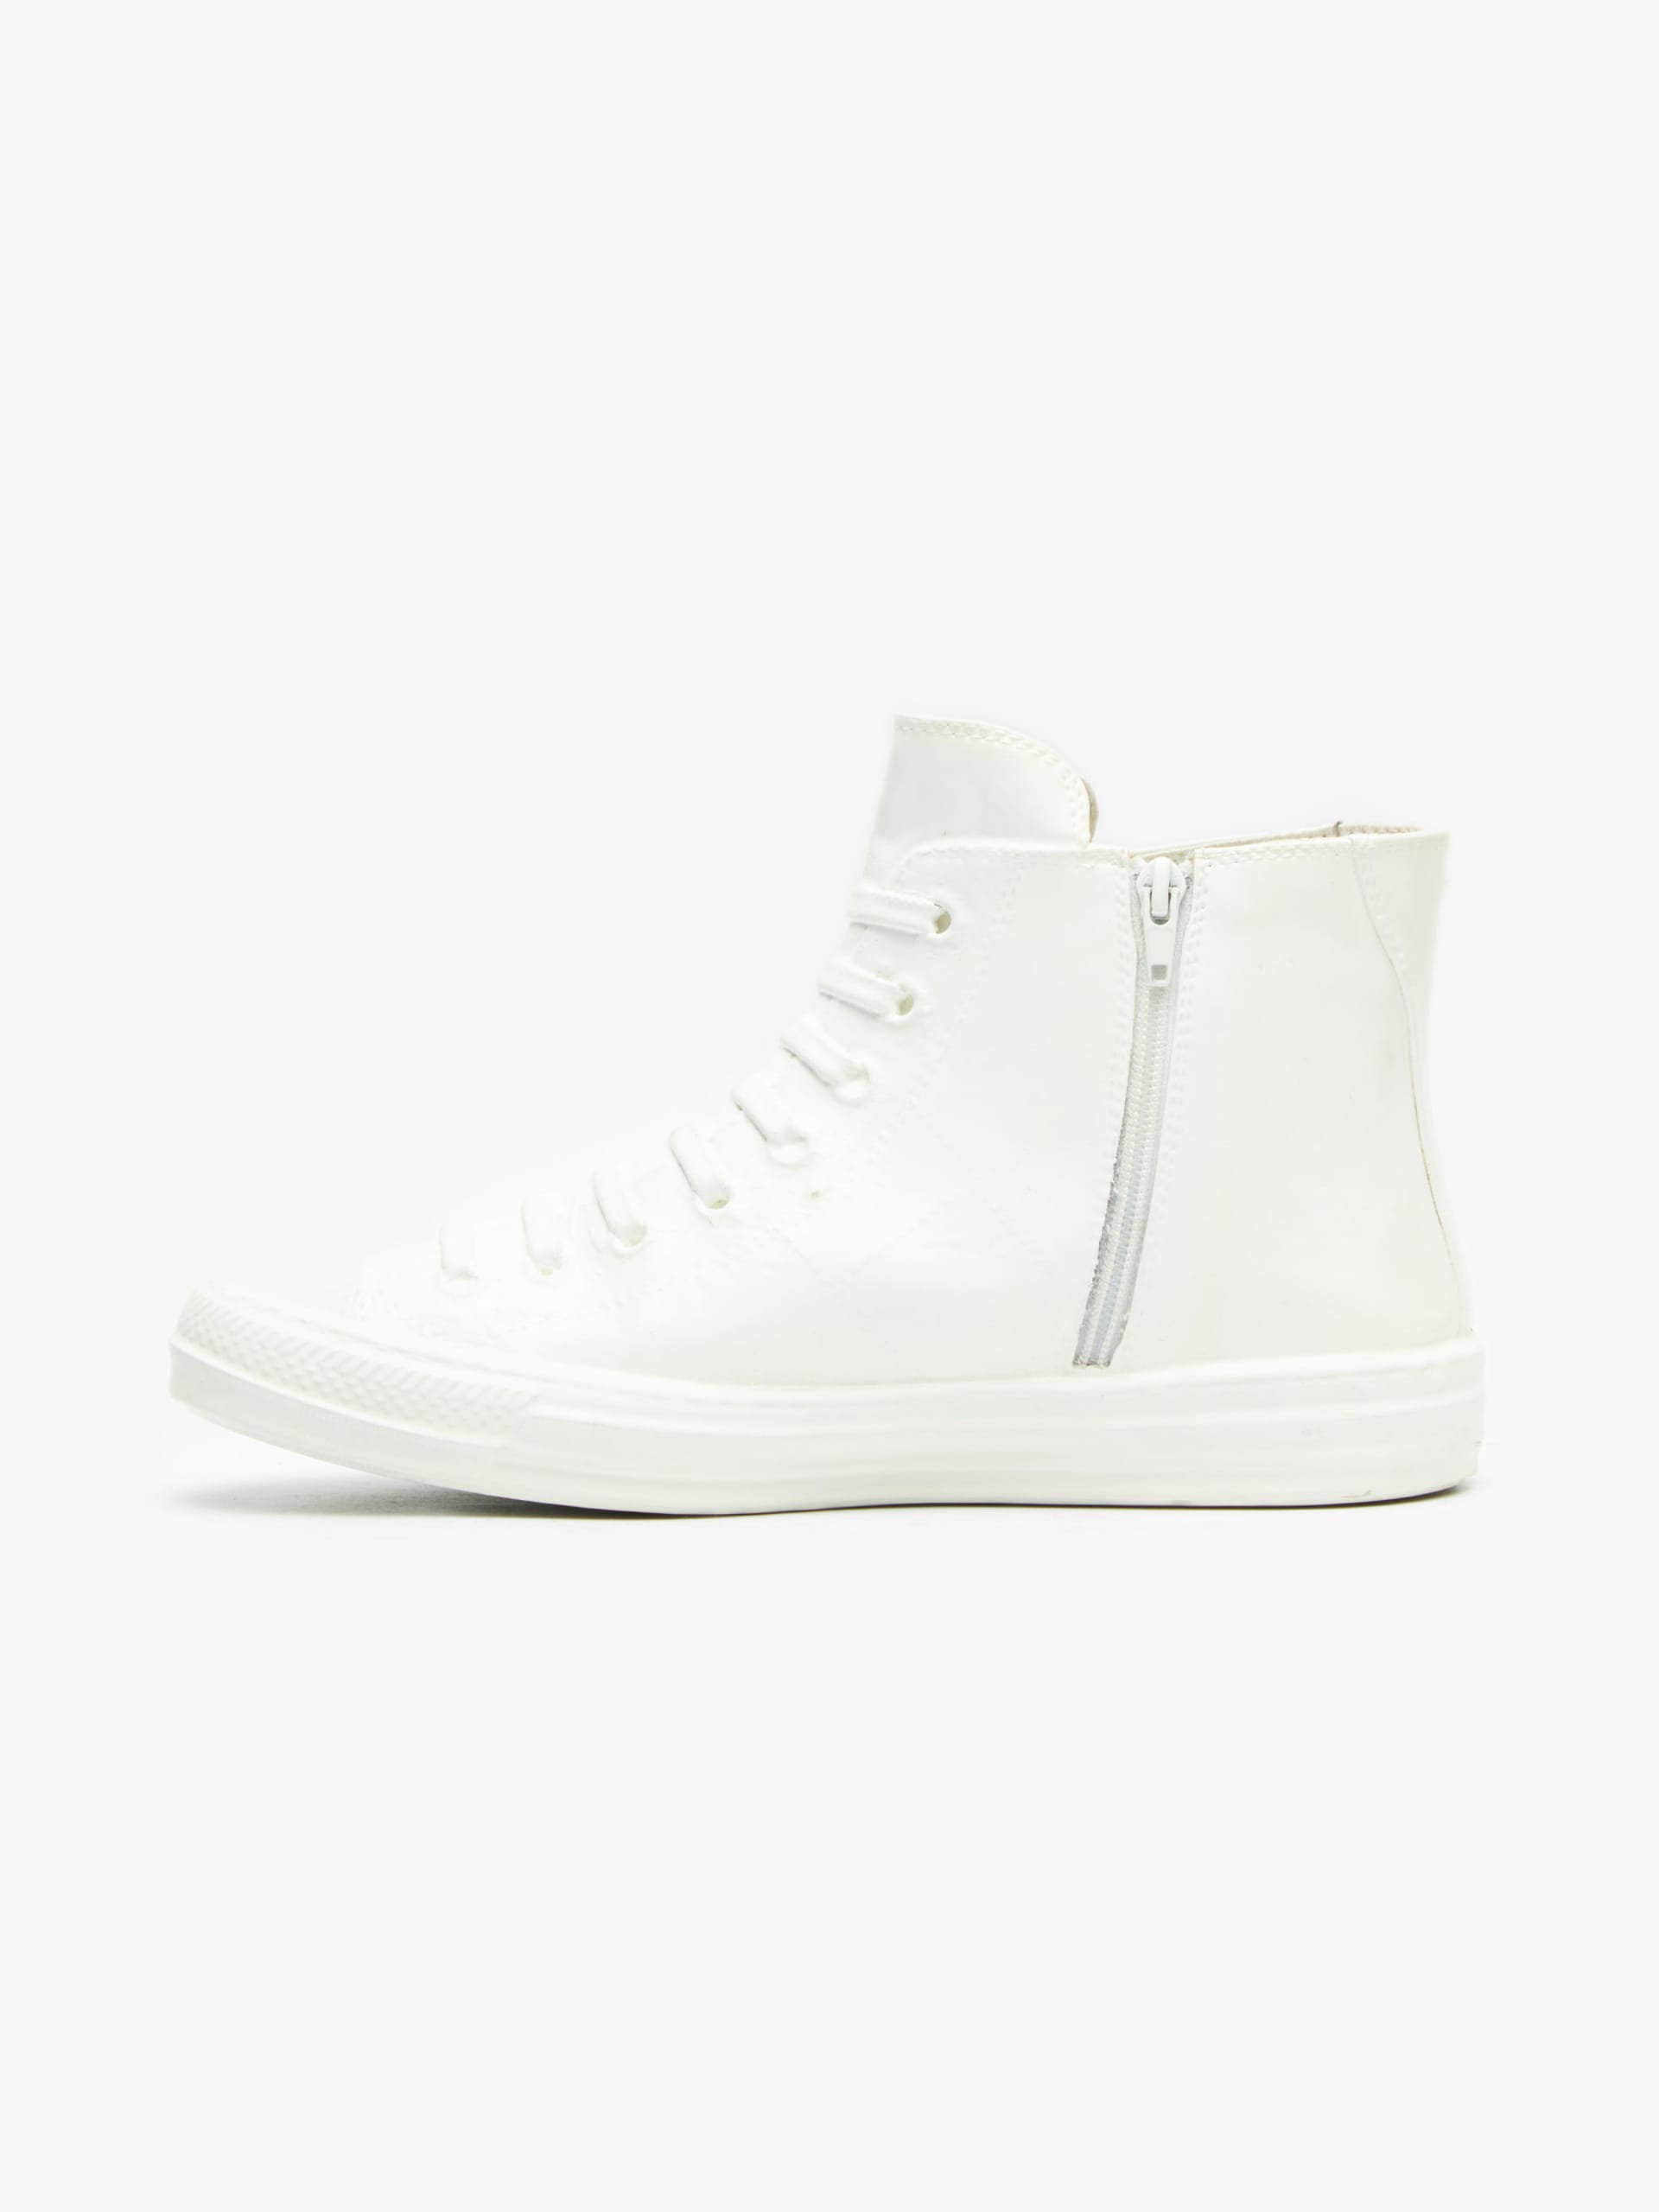 Maison Margiela White Full Lacquered Zipped High Sneakers